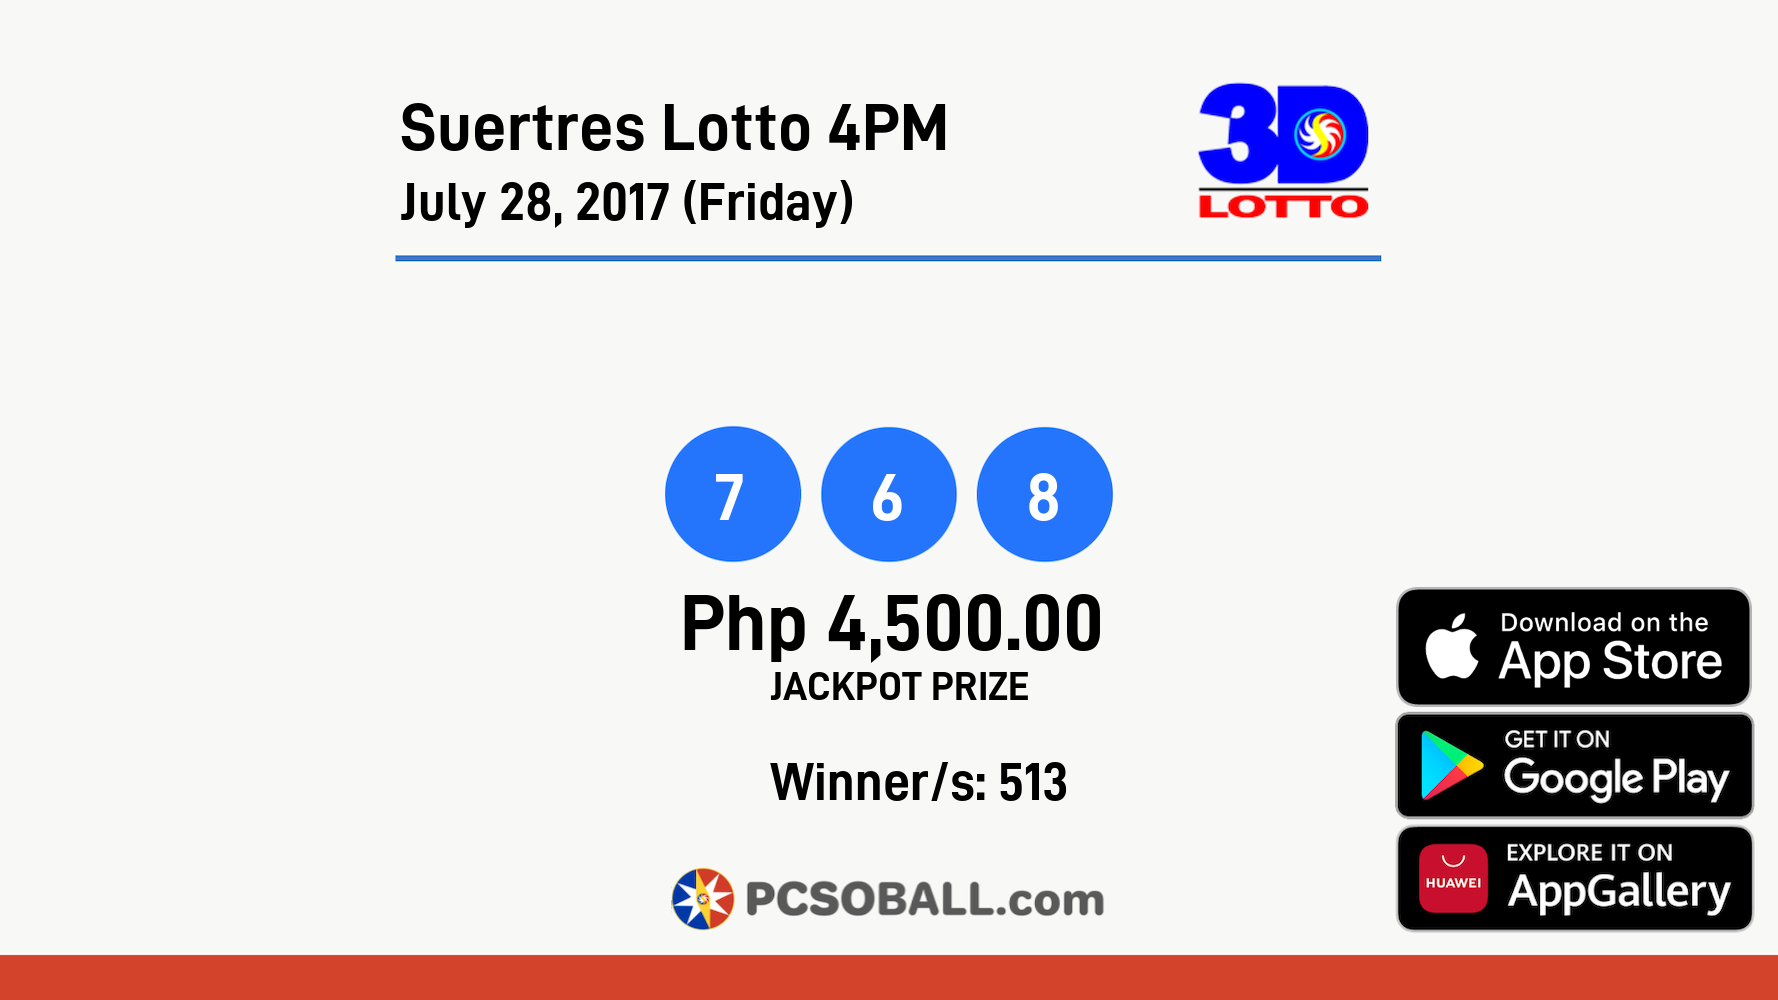 Suertres Lotto 4PM July 28, 2017 (Friday) Result